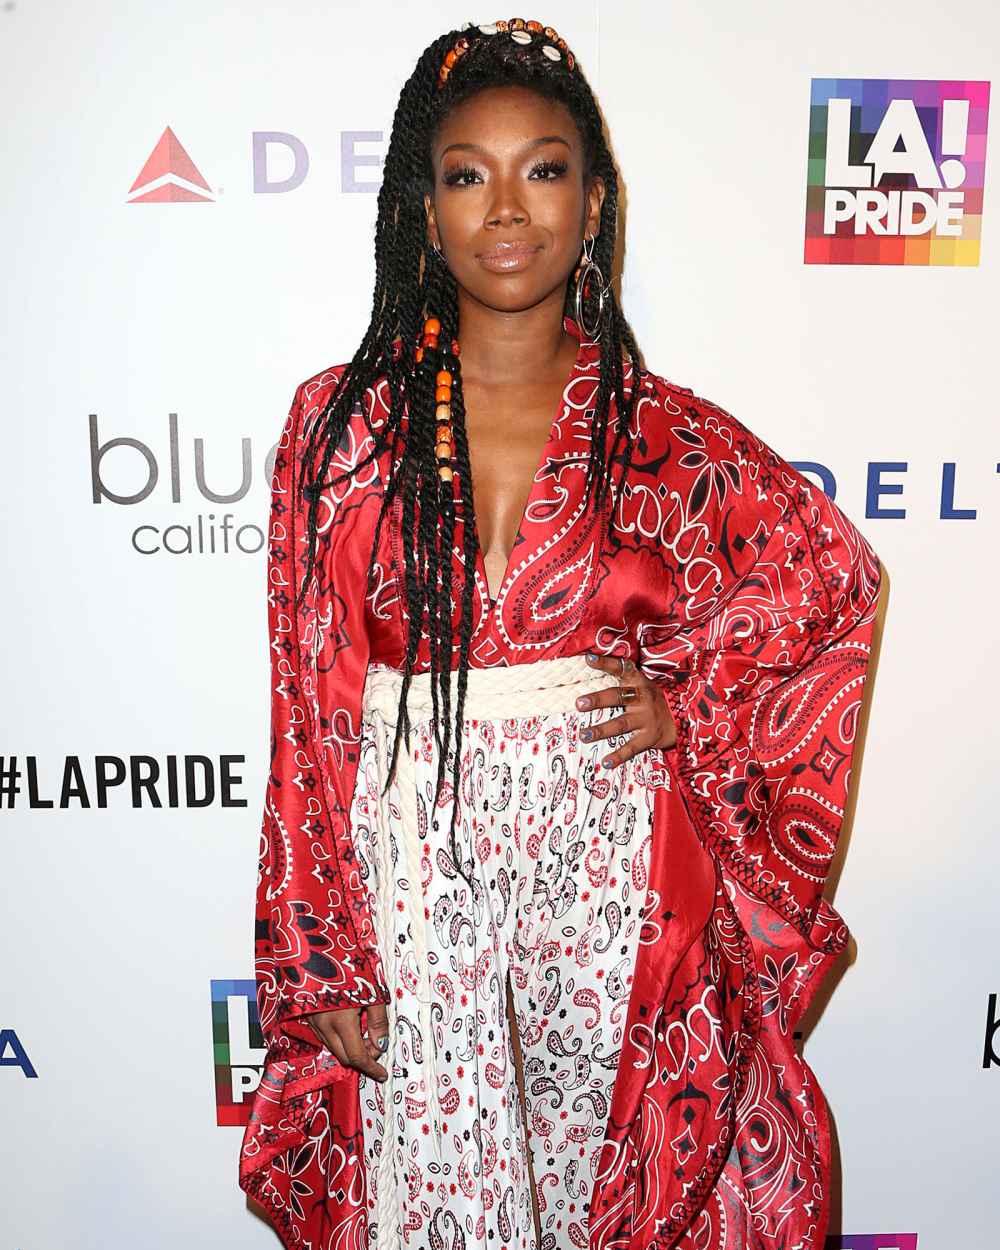 Brandy Hospitalized After Possibly Suffering a Seizure: Report